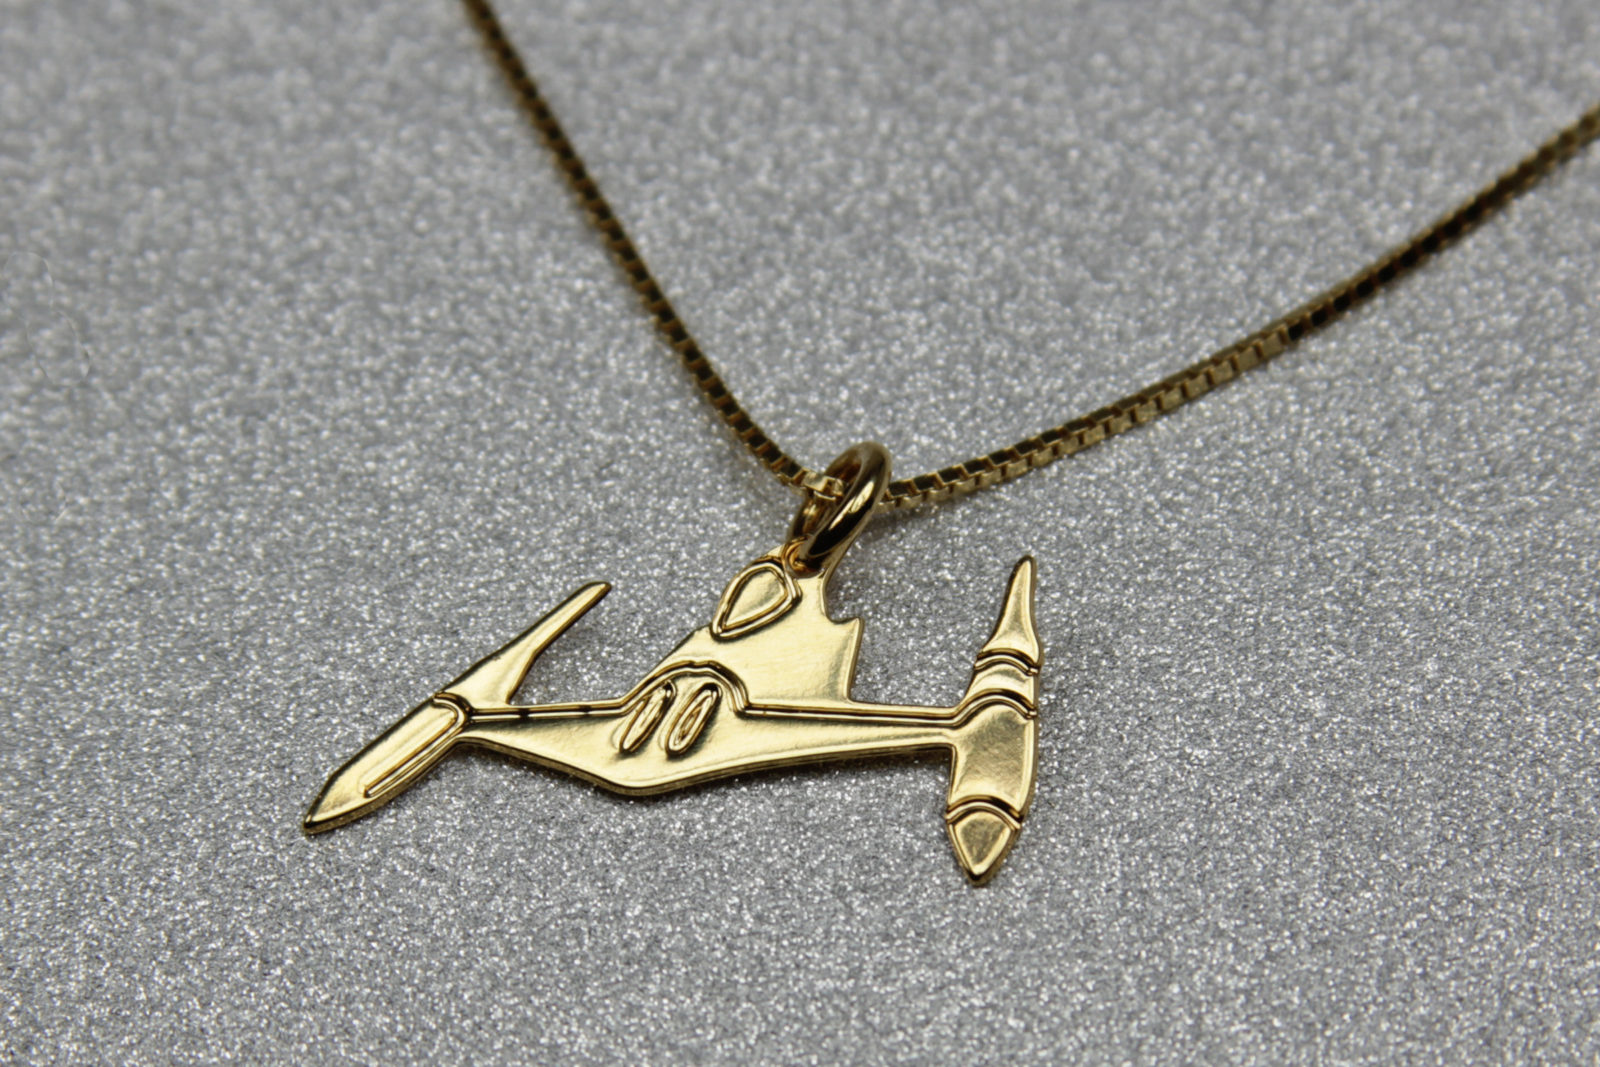 Review – Malaika Raiss Naboo Fighter Necklace